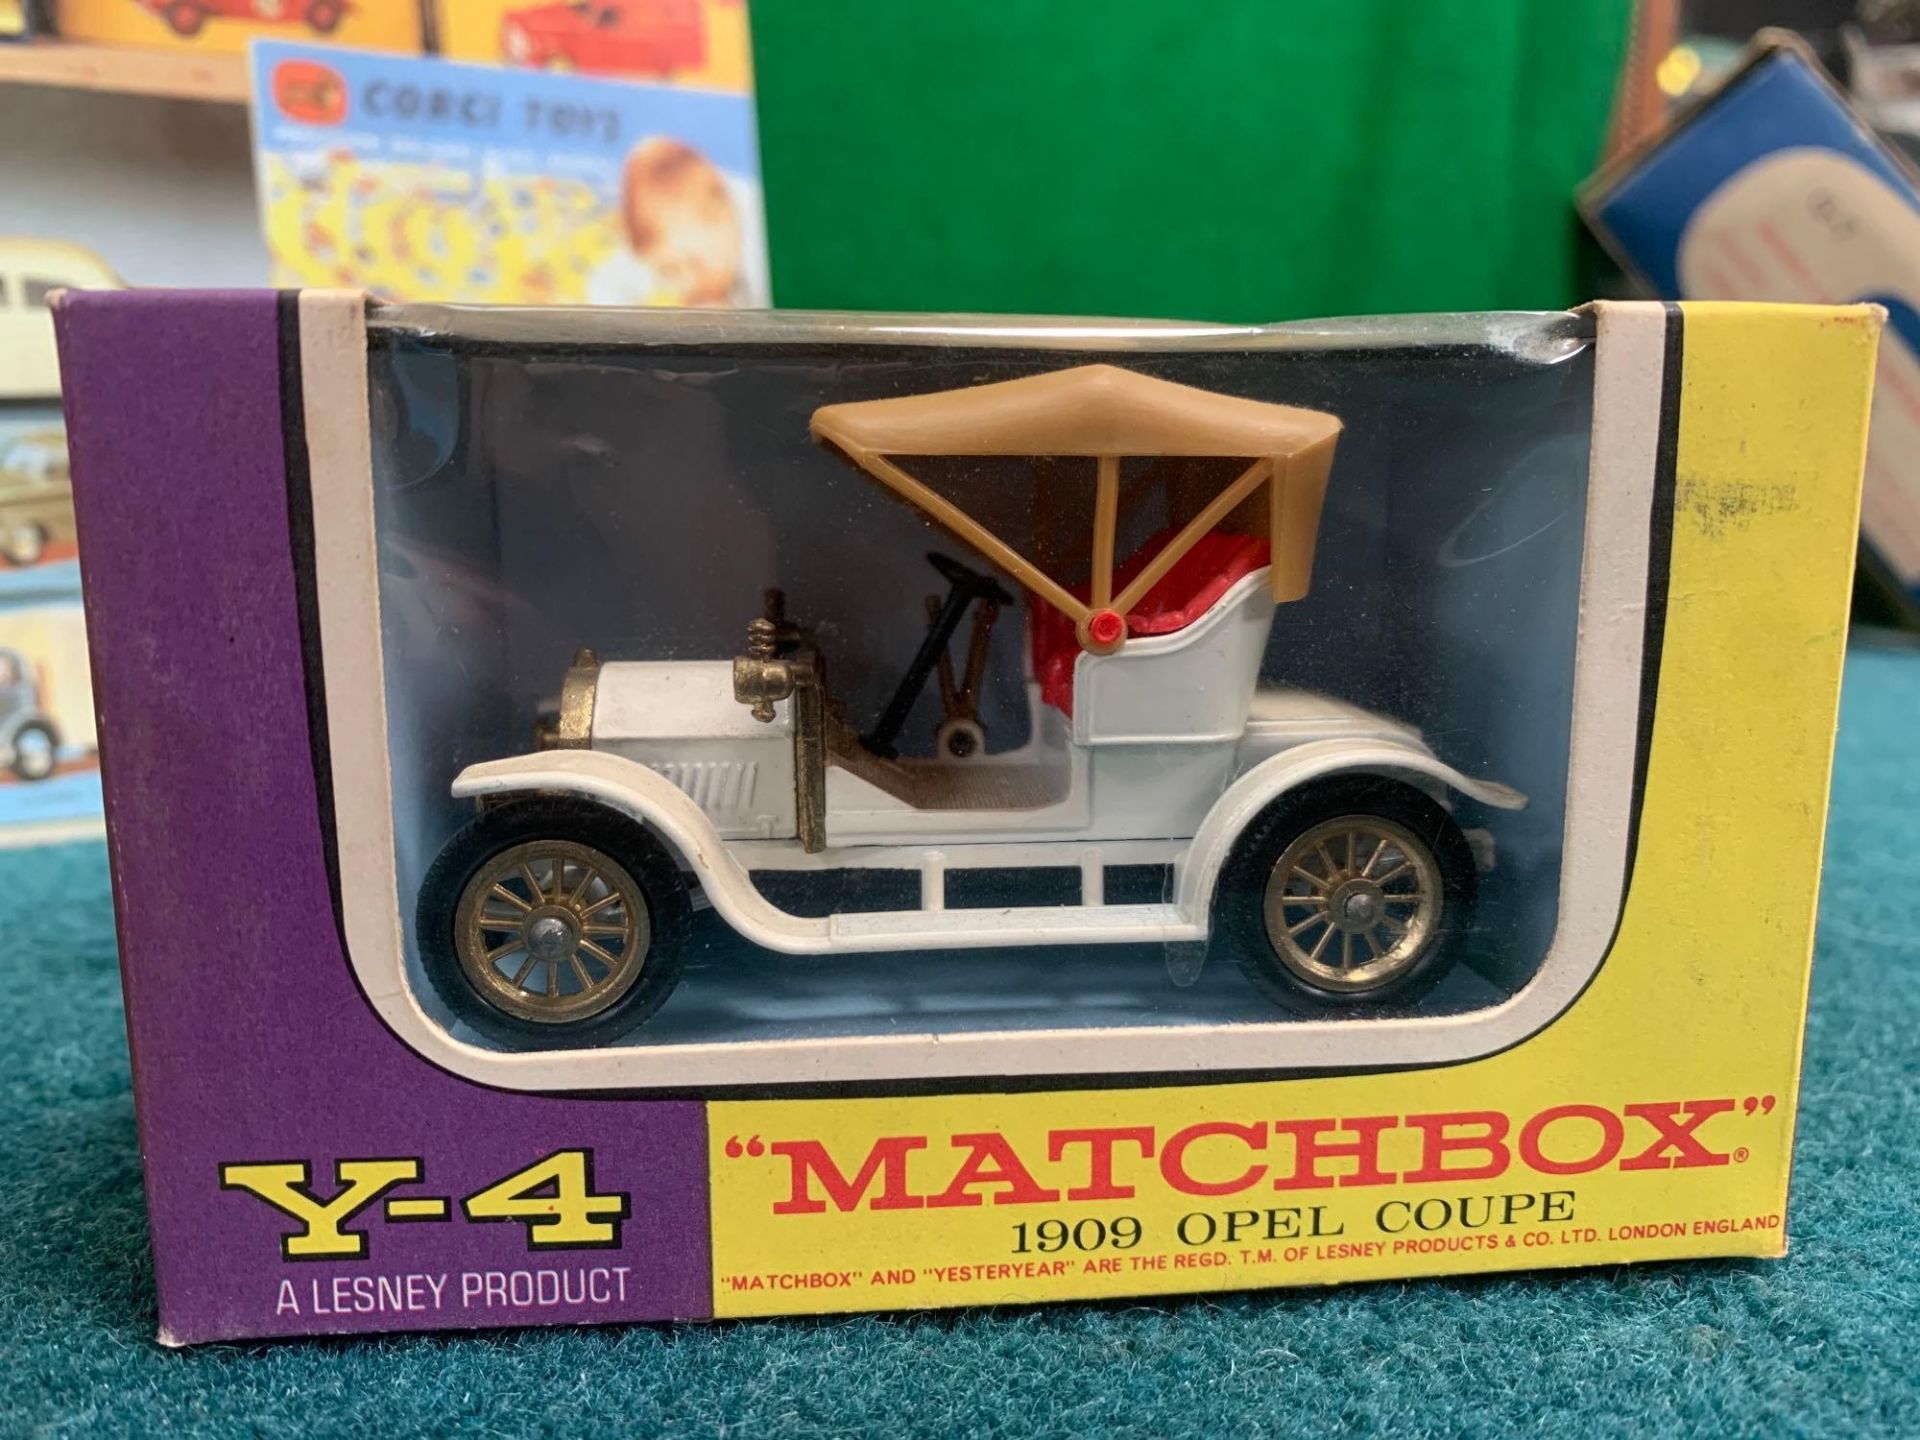 3 X Matchbox Models Of Yesteryear 1914 Stutz Y-8 1911 Maxwell Roadster Y-14 1909 Opel Coupe Y-4 - Image 9 of 9